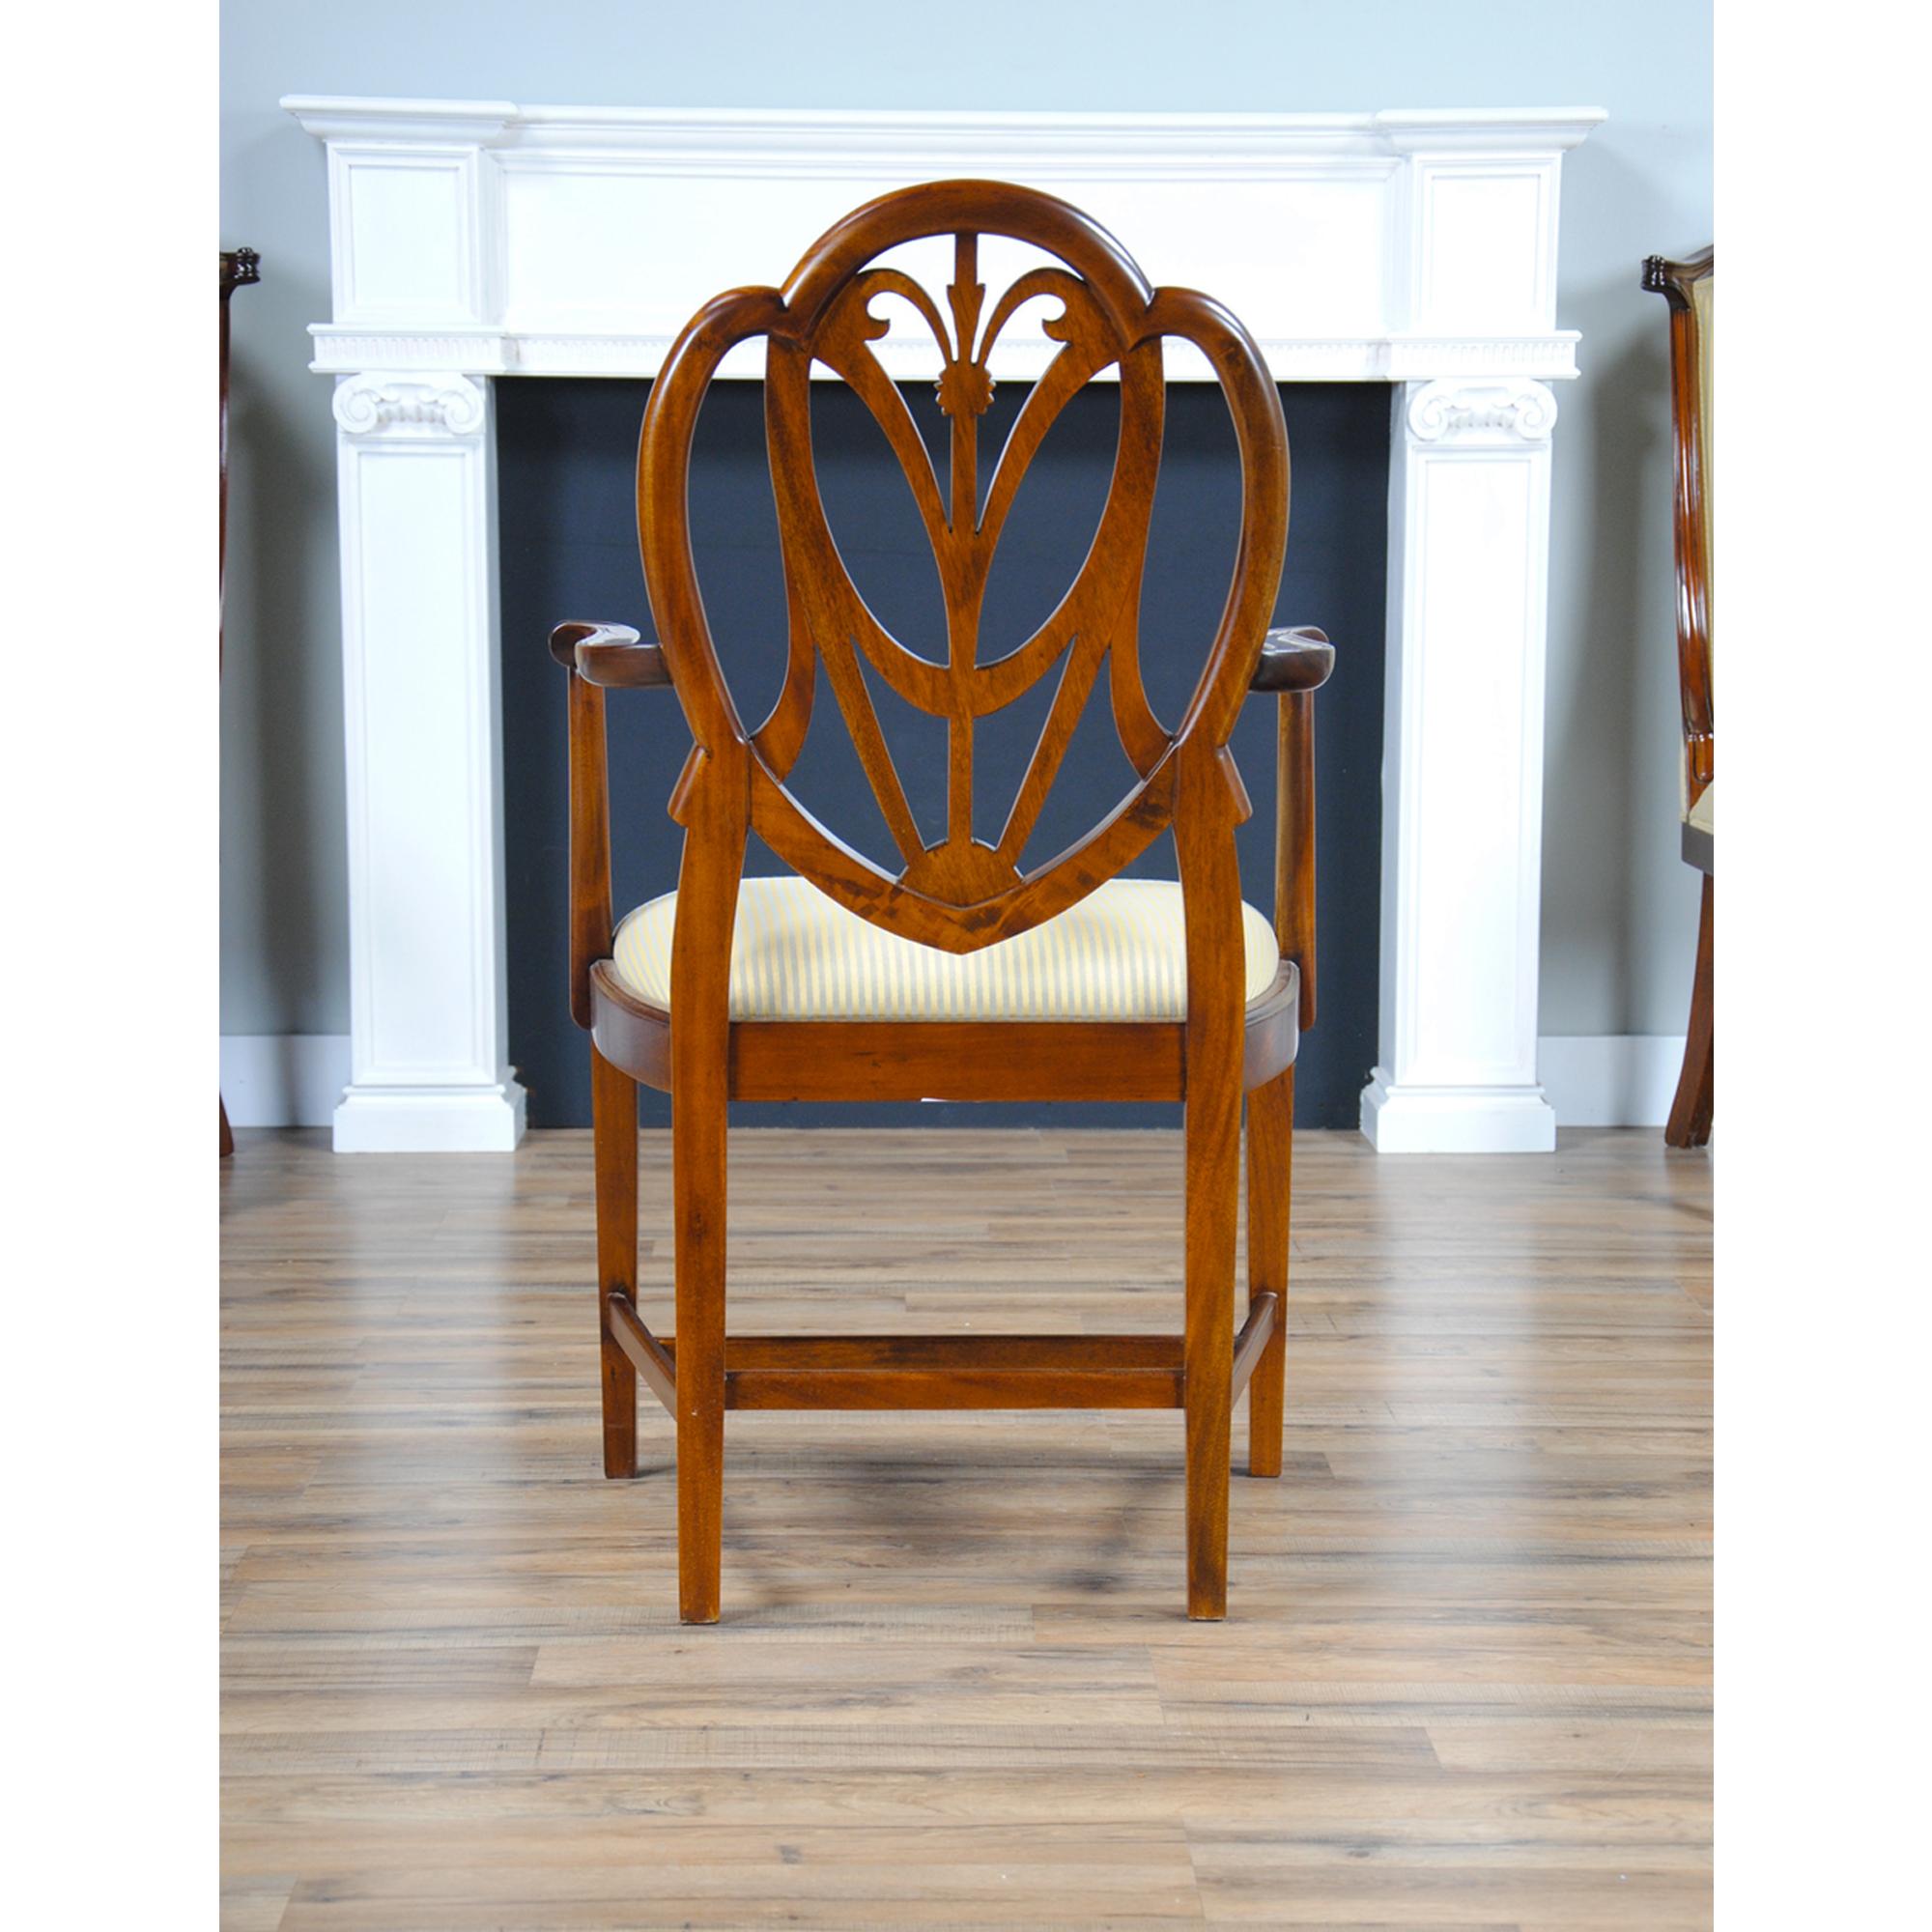 Tall Sweet Heart Chairs, Set of 10 In New Condition For Sale In Annville, PA